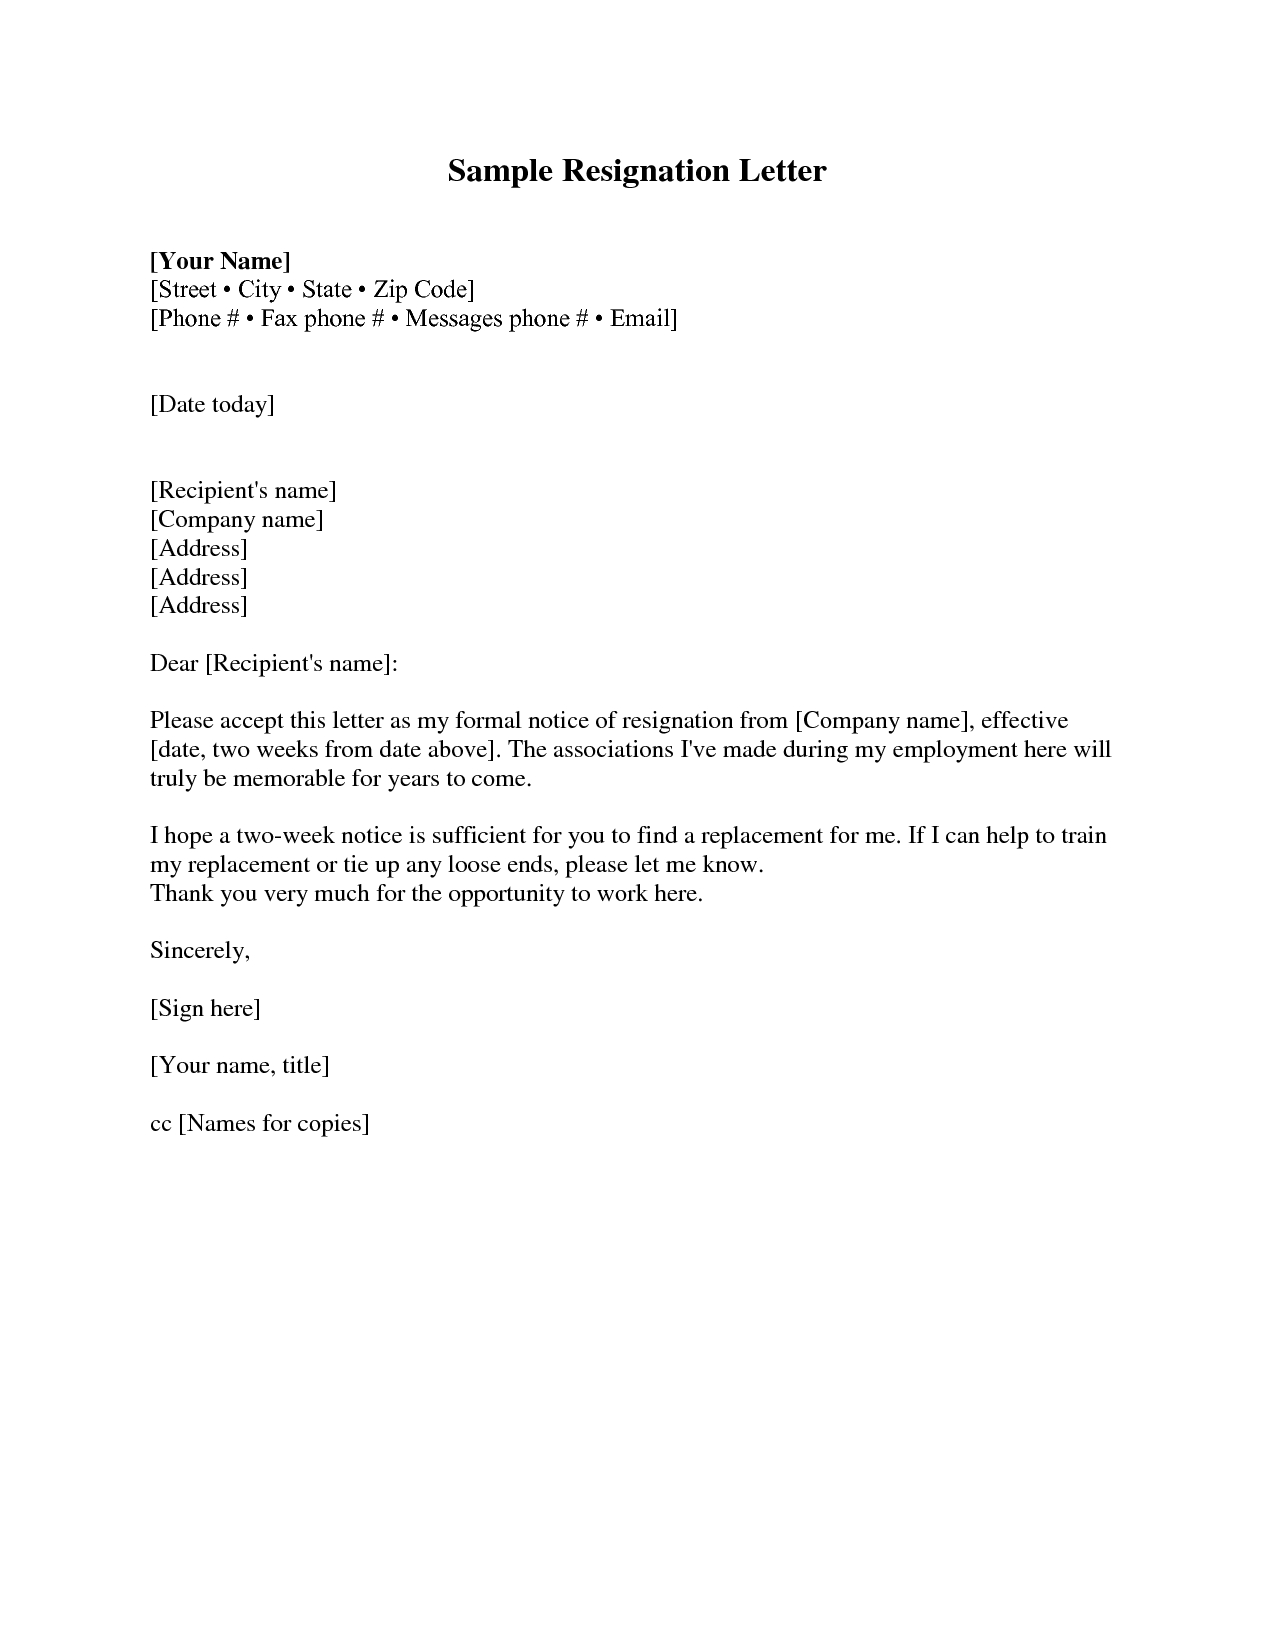 Free Resignation Letter Template Word - Resignation Letter Sample 2 Weeks Notice Free2img